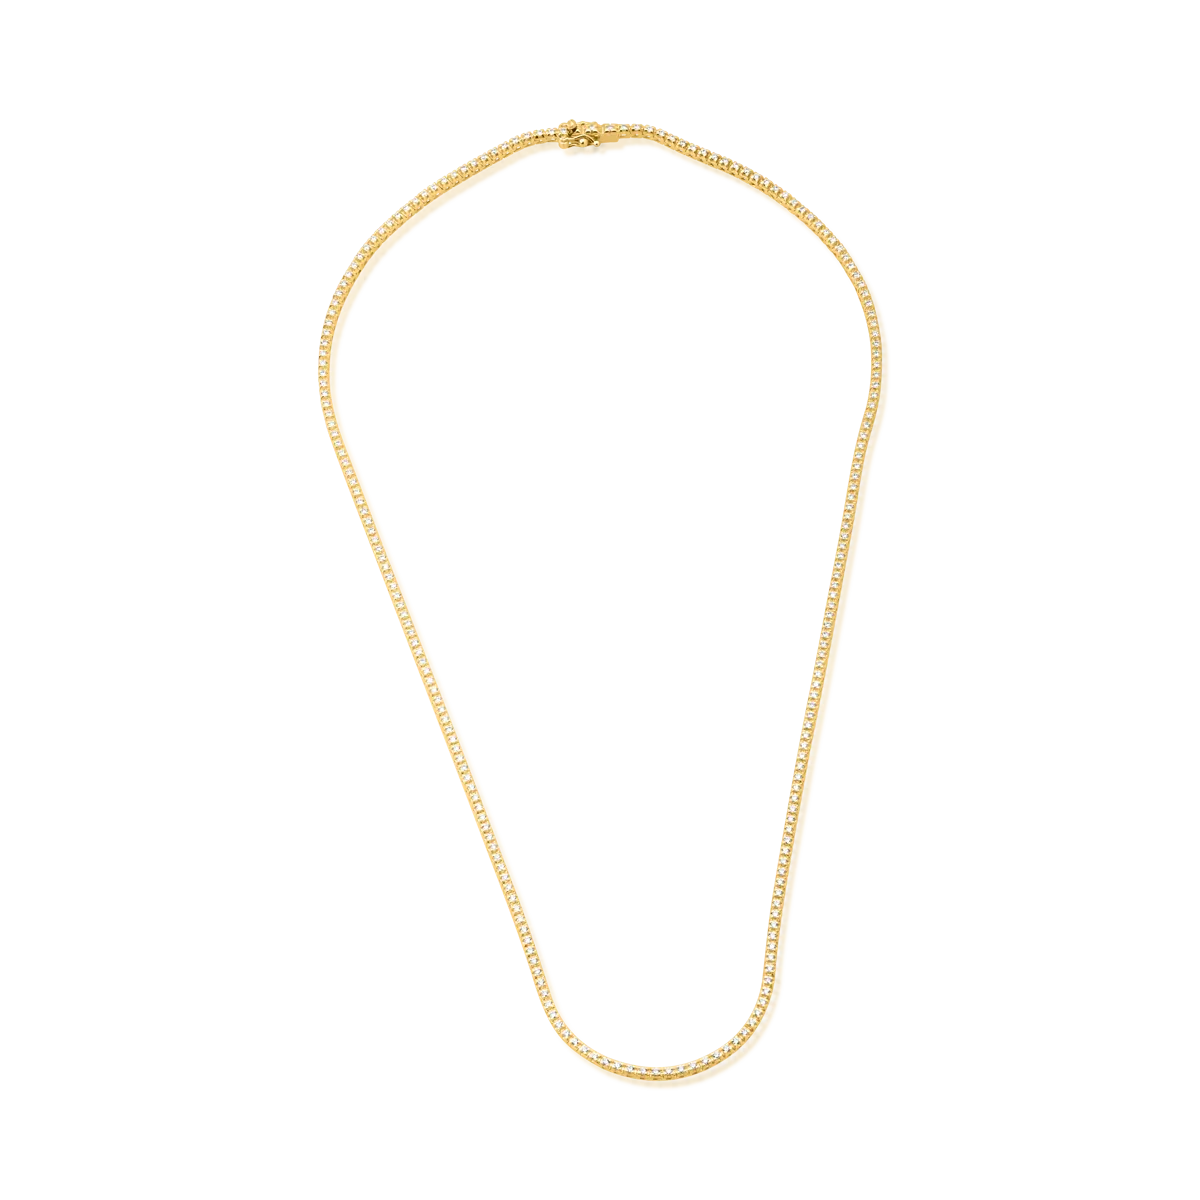 18K yellow gold tennis necklace with 2.8ct diamonds